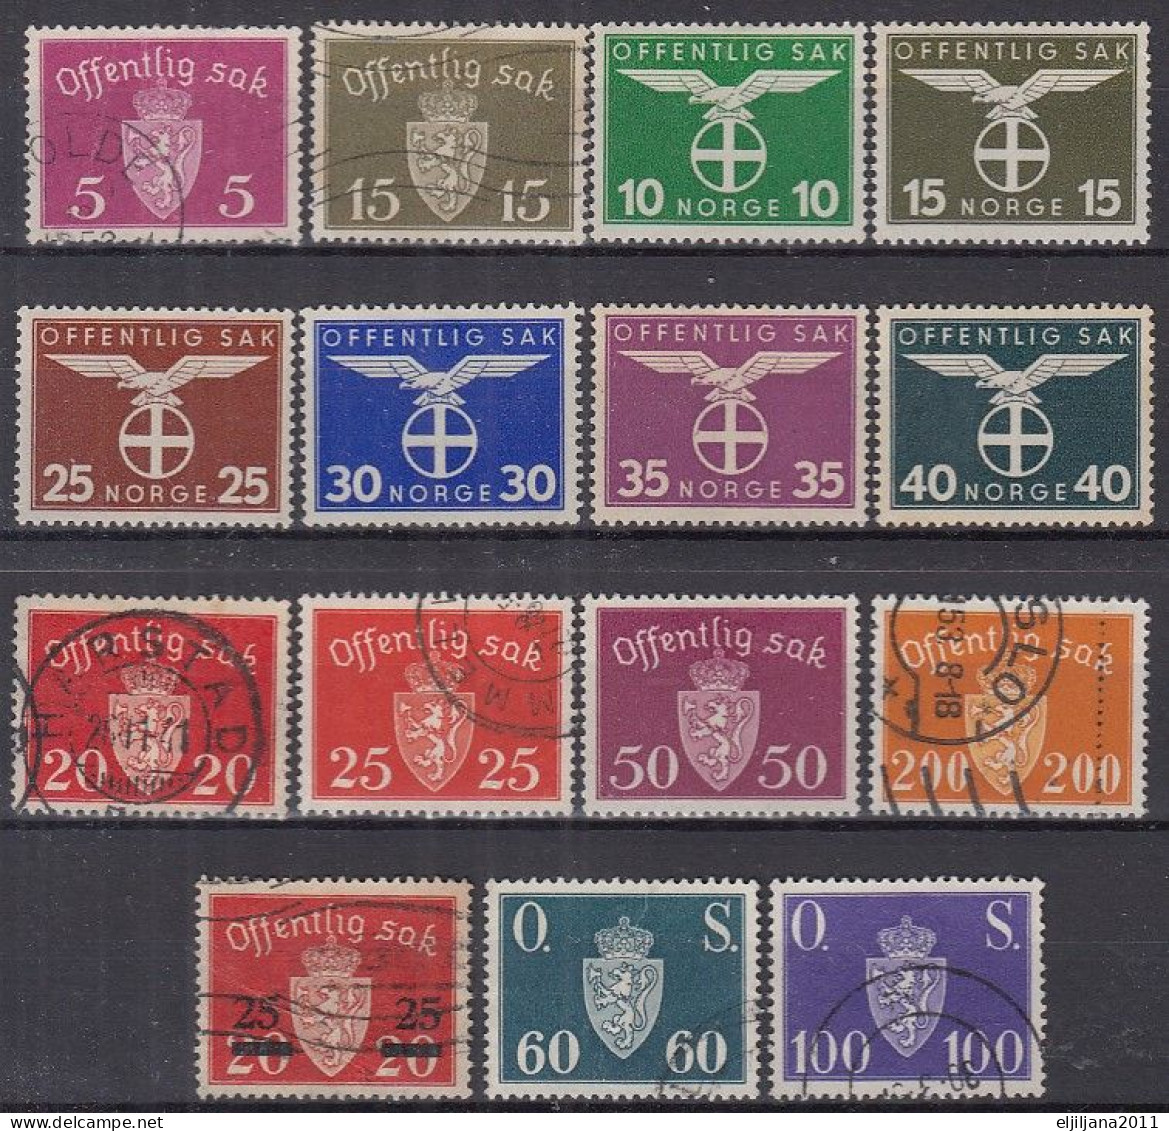 Action !! SALE !! 50 % OFF !! ⁕ Norway / NORGE 1937 - 1952 ⁕ Official Stamps ⁕ 15v MH & Used - Oficiales